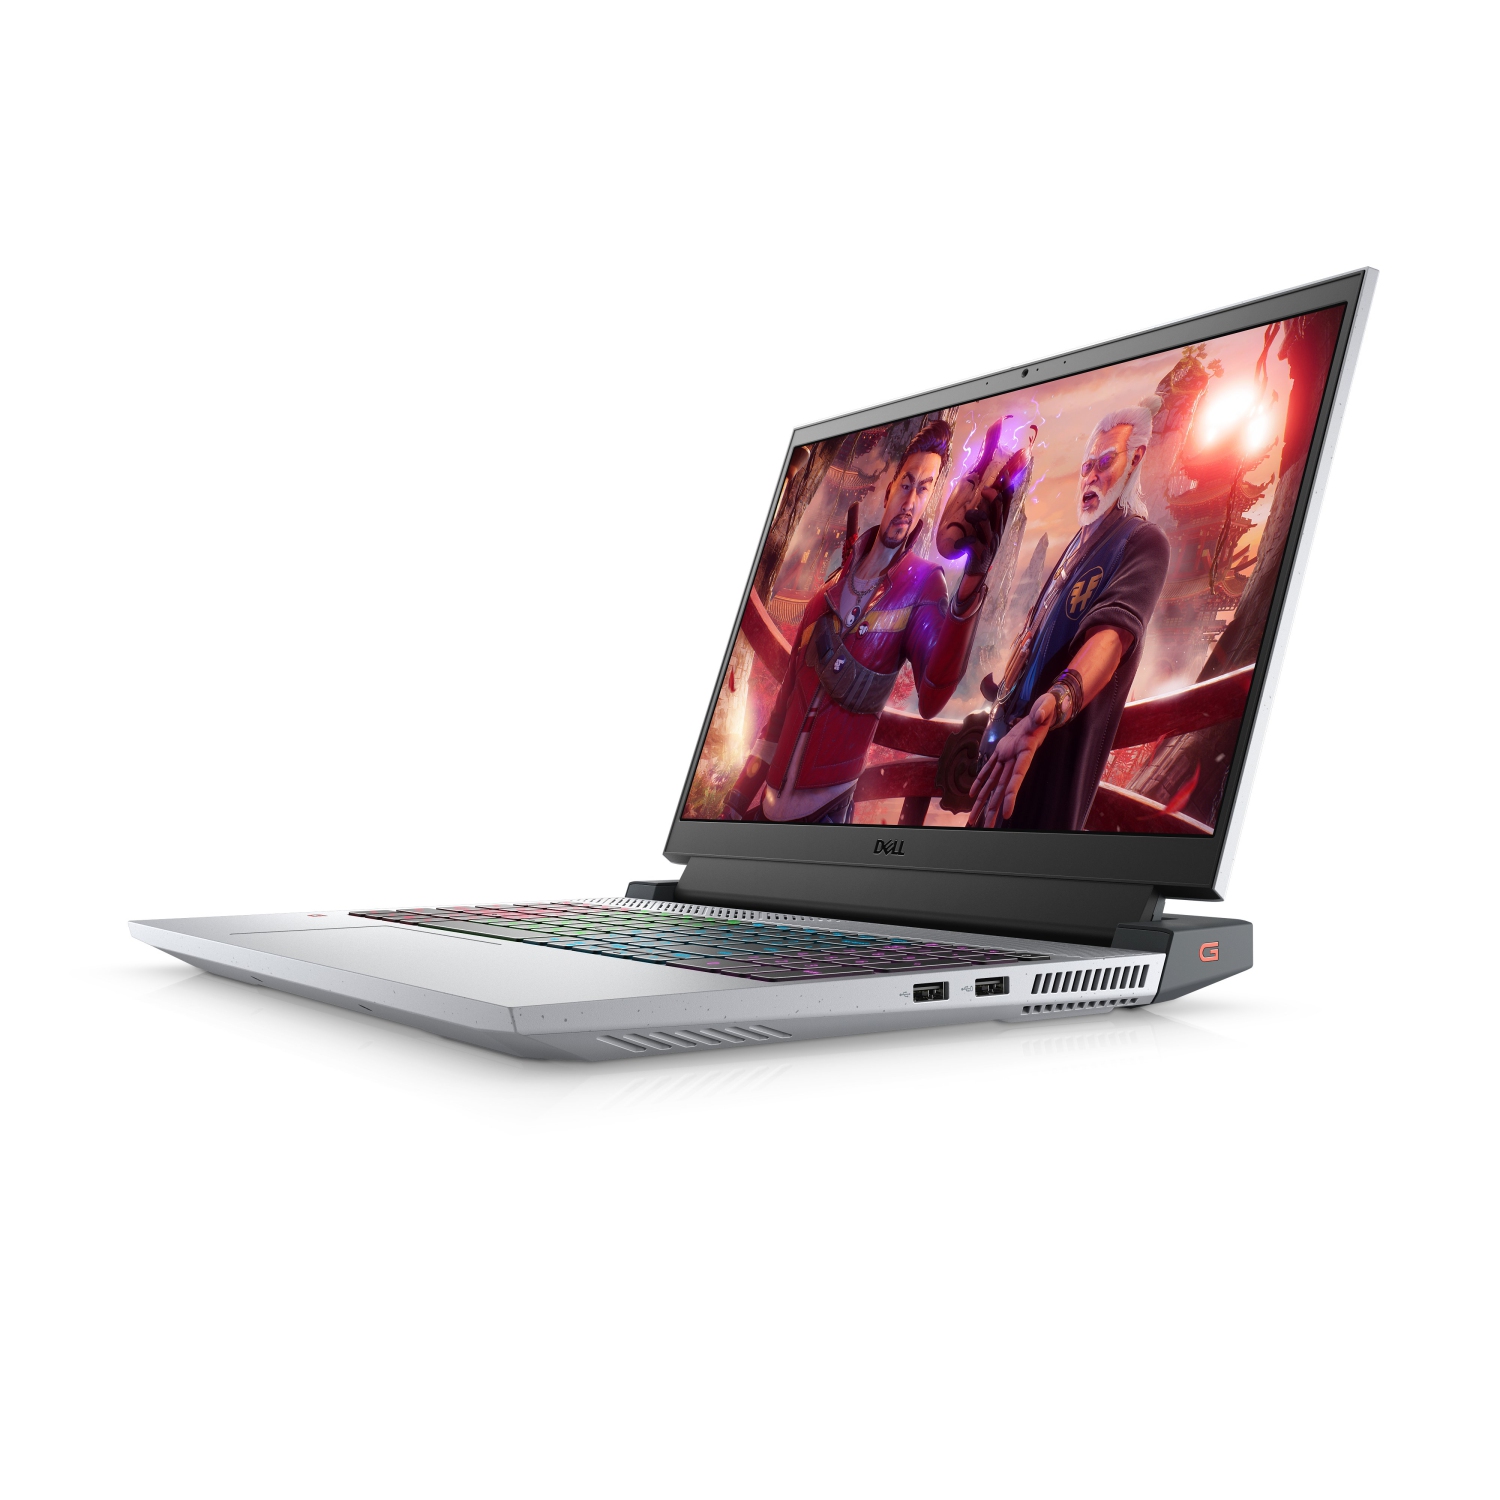 Refurbished (Excellent) – Dell G15 5515 Gaming Laptop (2021) | 15.6" FHD | Core Ryzen 7 - 512GB SSD - 16GB RAM - RTX 3060 | 8 Cores @ 4.4 GHz - 12GB GDDR6